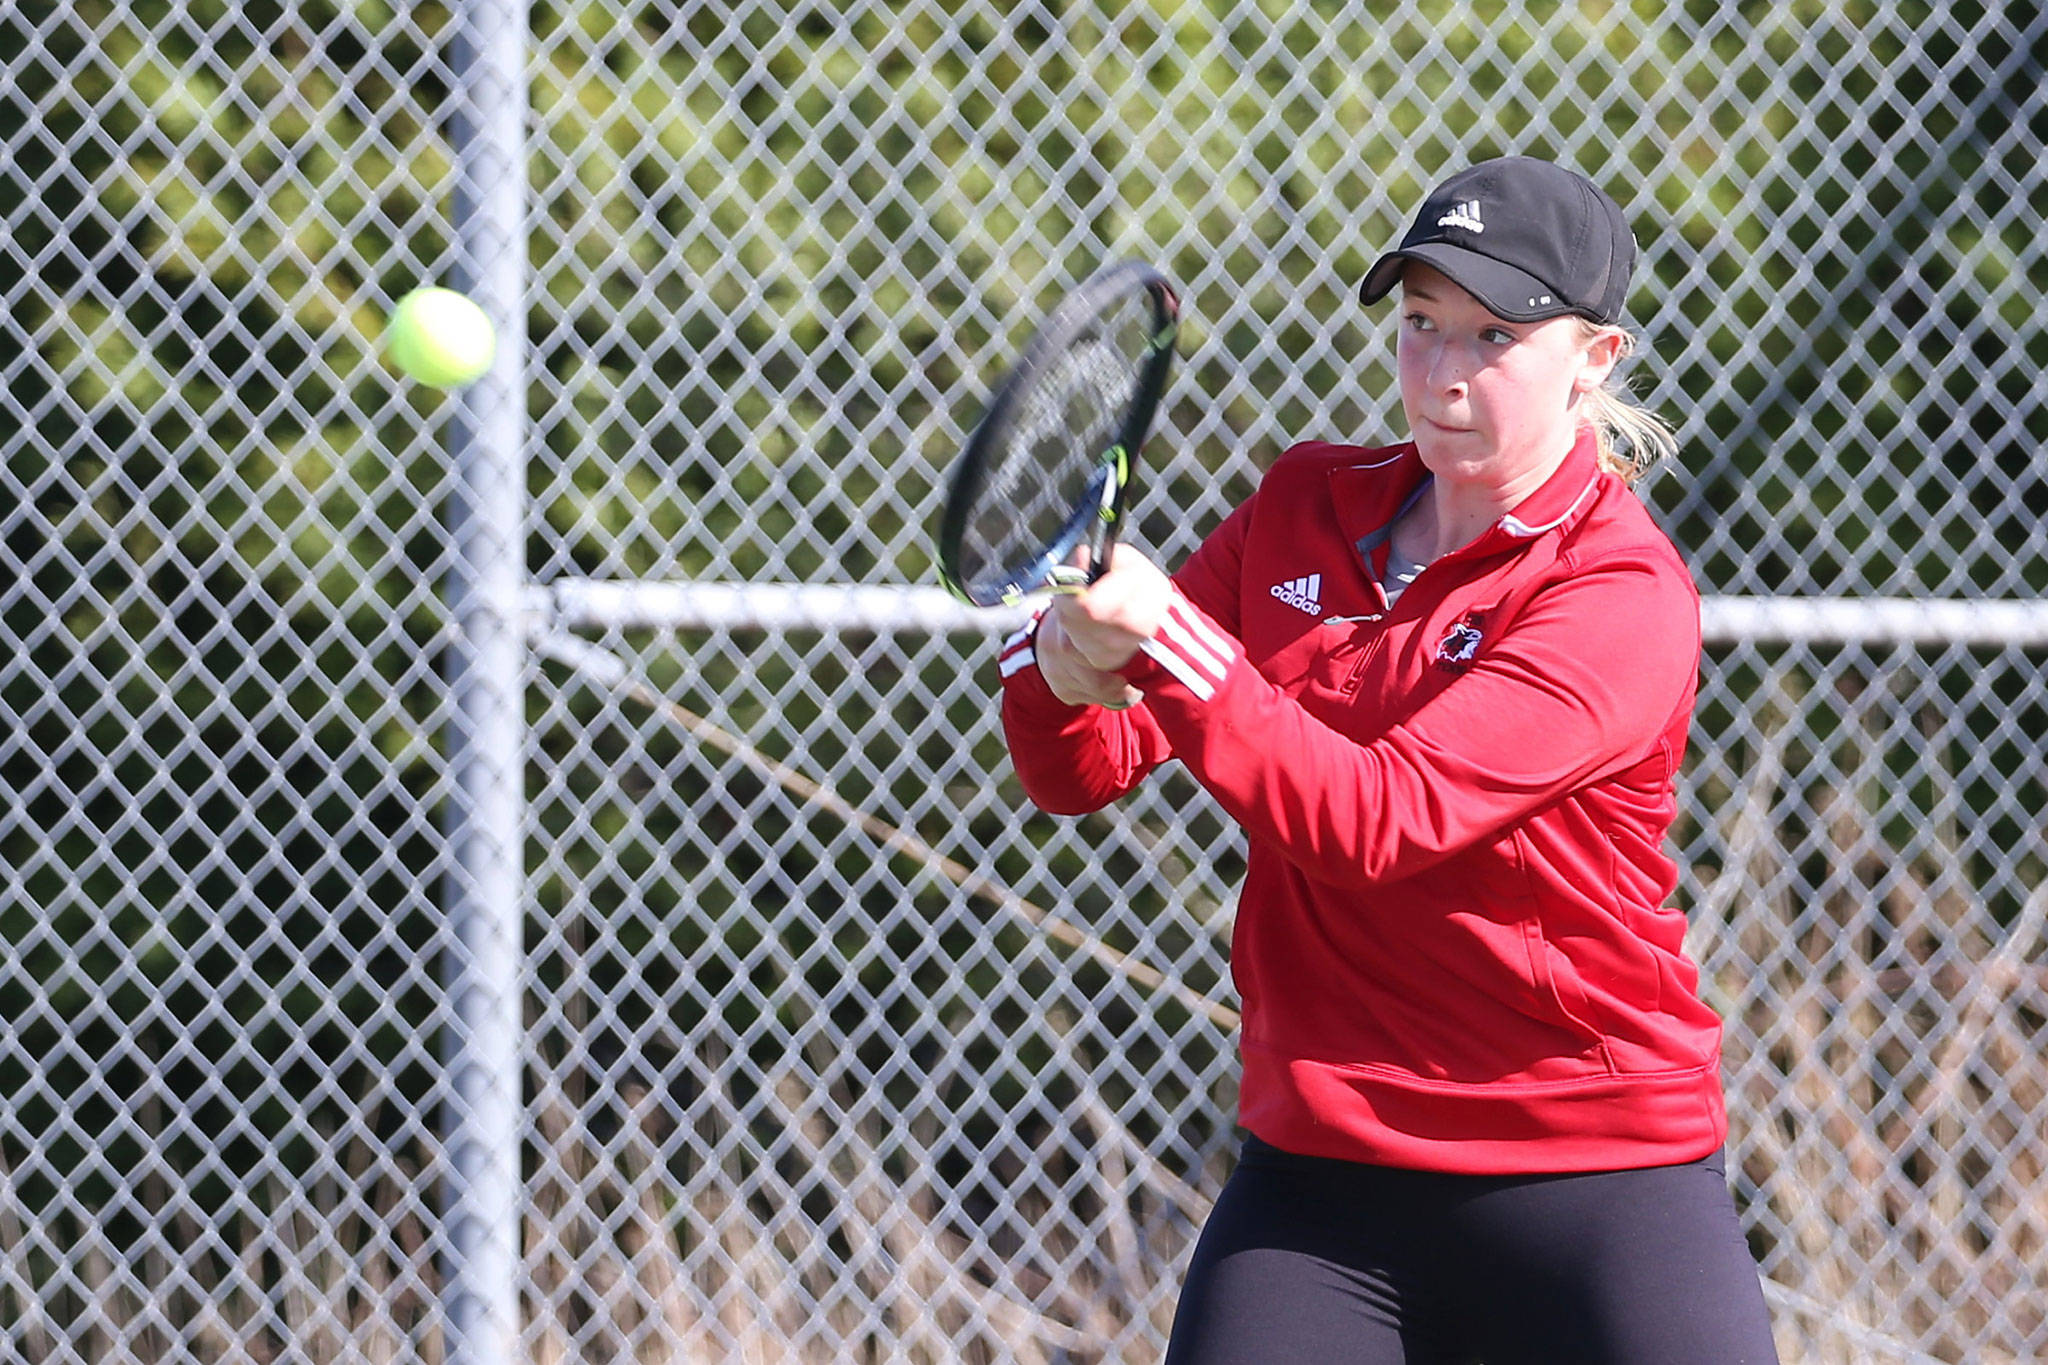 Coupeville’s Jillian Mayne swats a backhand in her second singles match against South Whidbey Tuesday. (Photo by John Fisken)